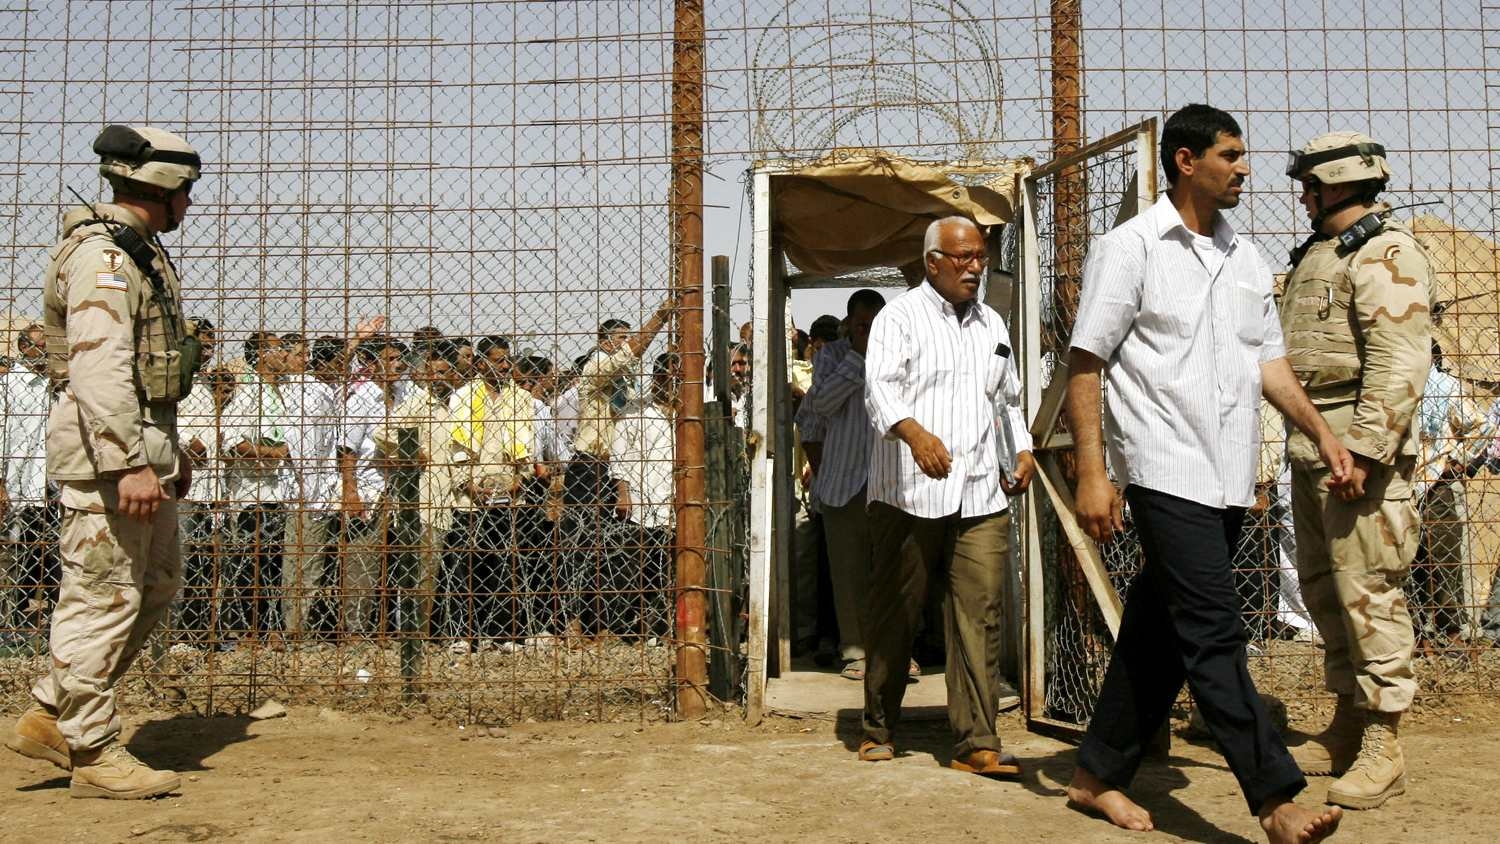 US soldiers stand on guard at the Abu Ghraib prison shortly before prisoners are released in Baghdad, on 15 June 2006.